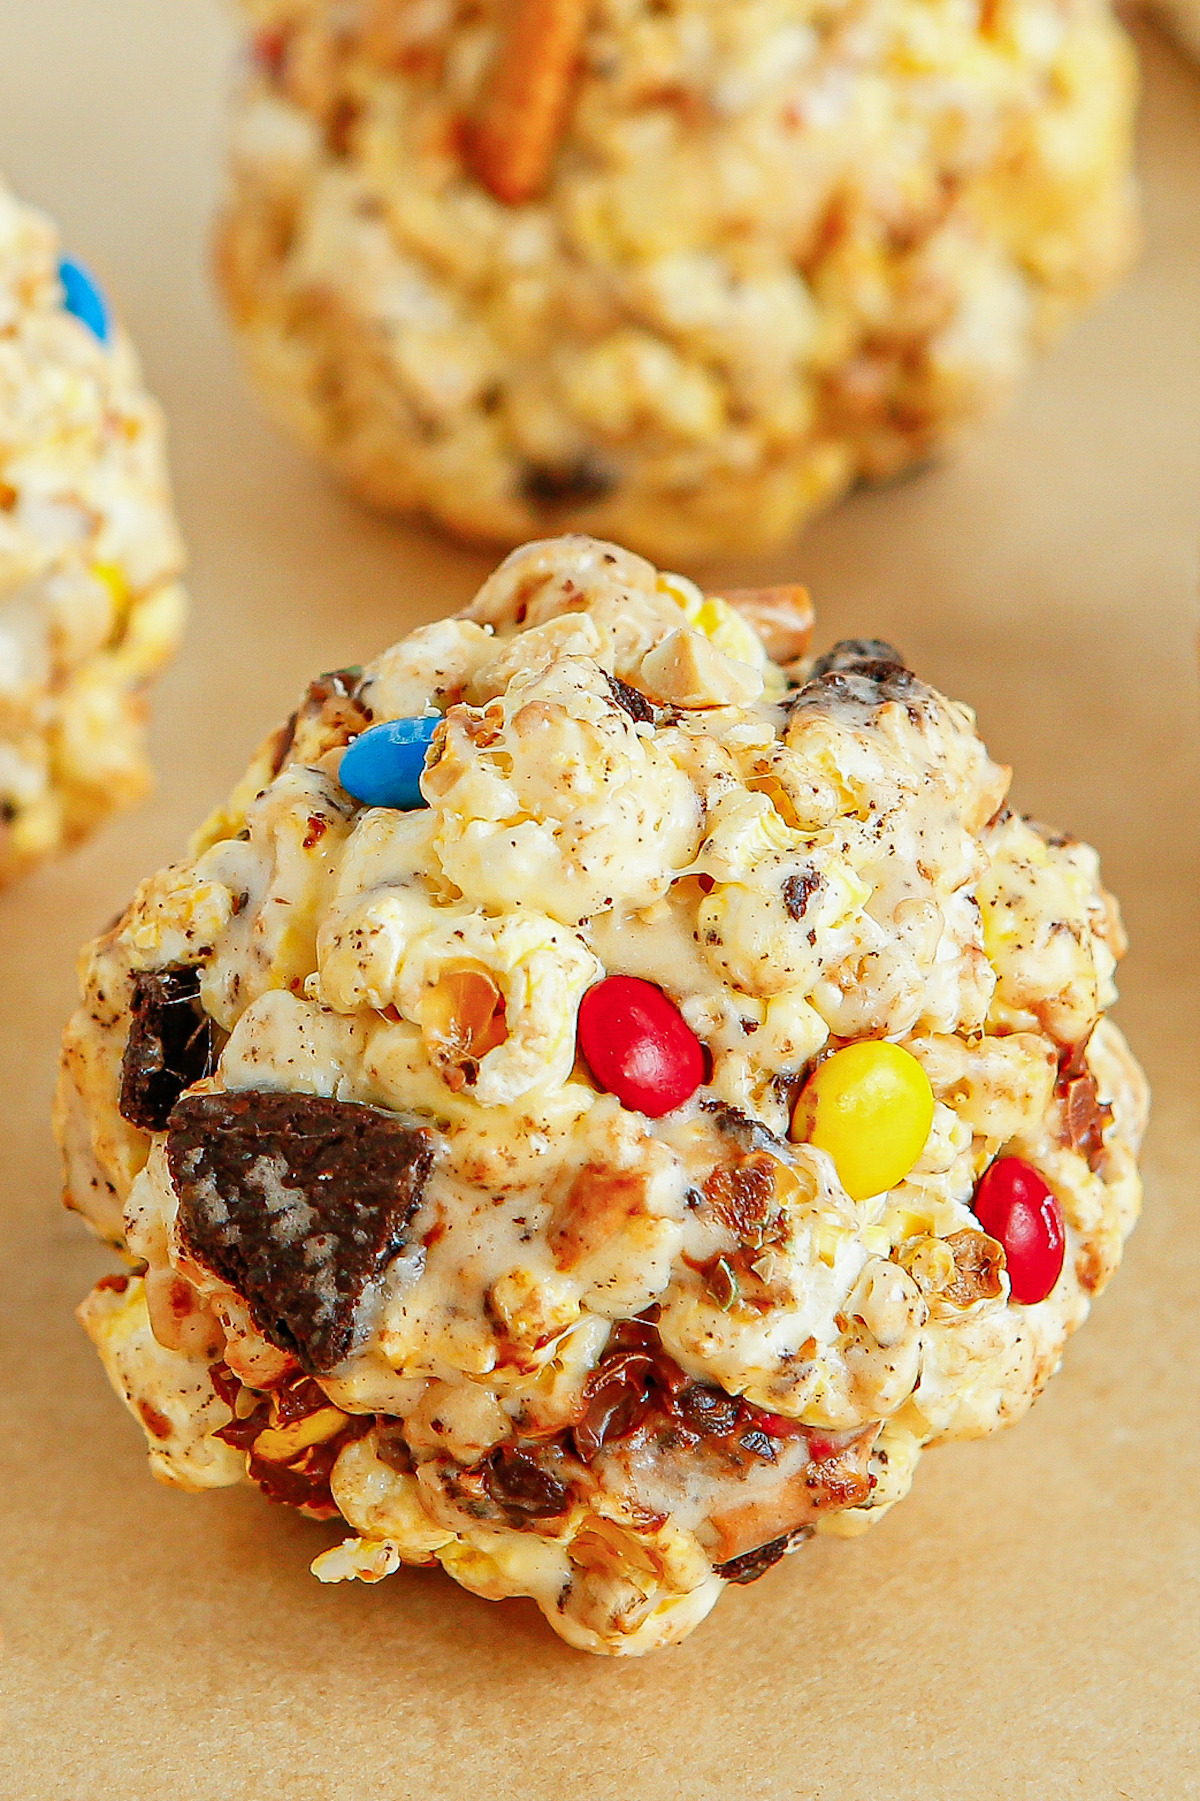 Close-up shot of a popcorn treat with mini M&Ms and other ingredients.